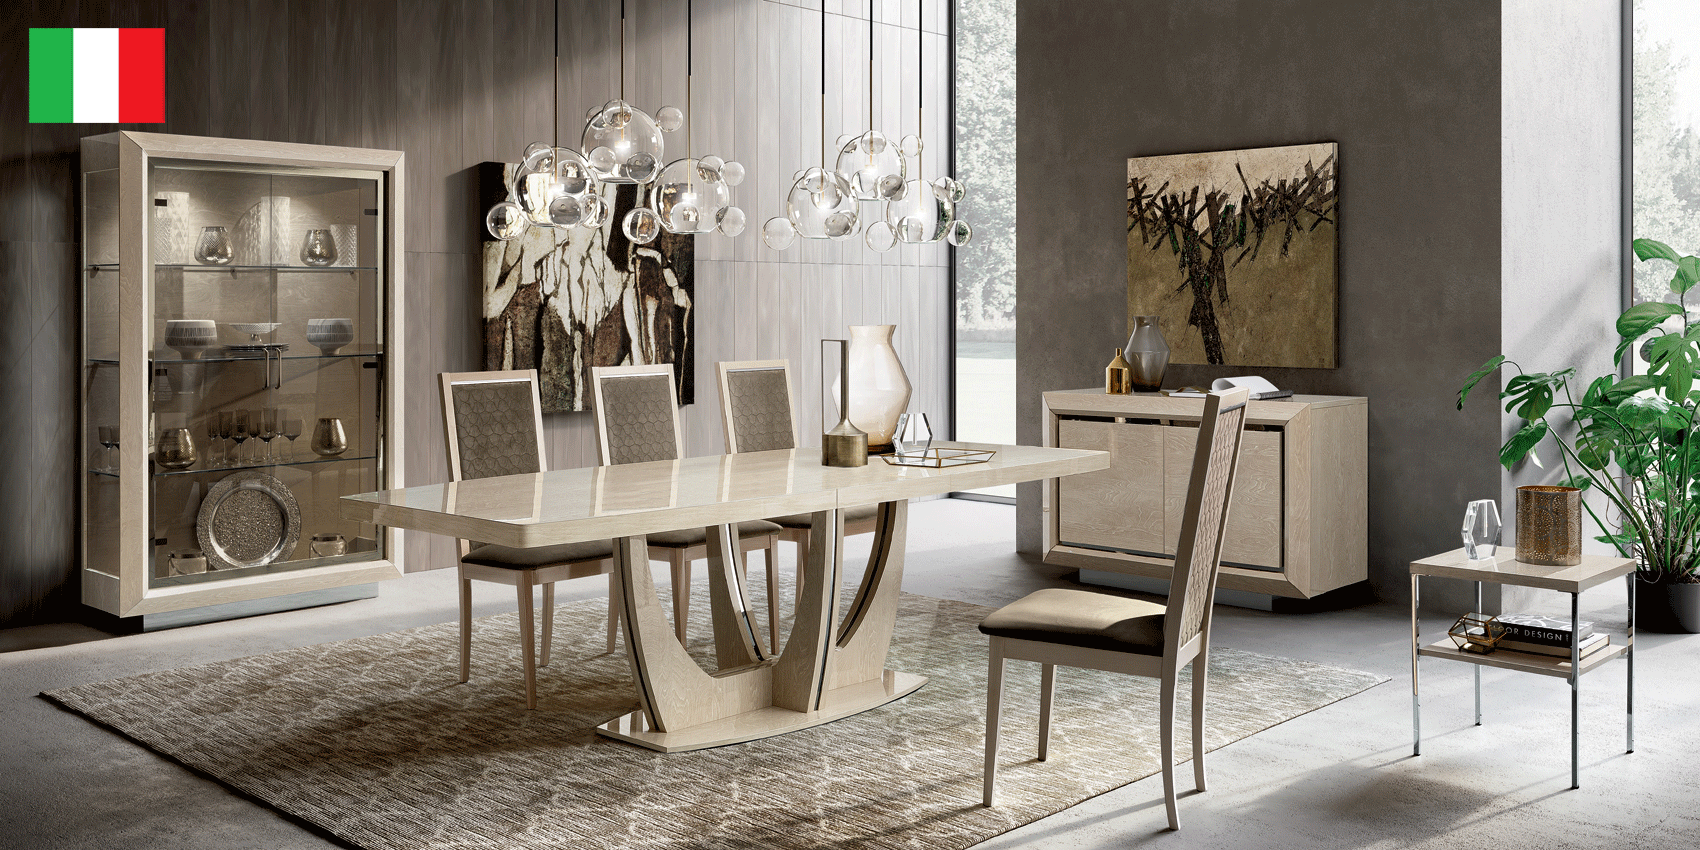 Dining Room Furniture Kitchen Tables and Chairs Sets Elite Dining Ivory with Ambra “Rombi” Chairs